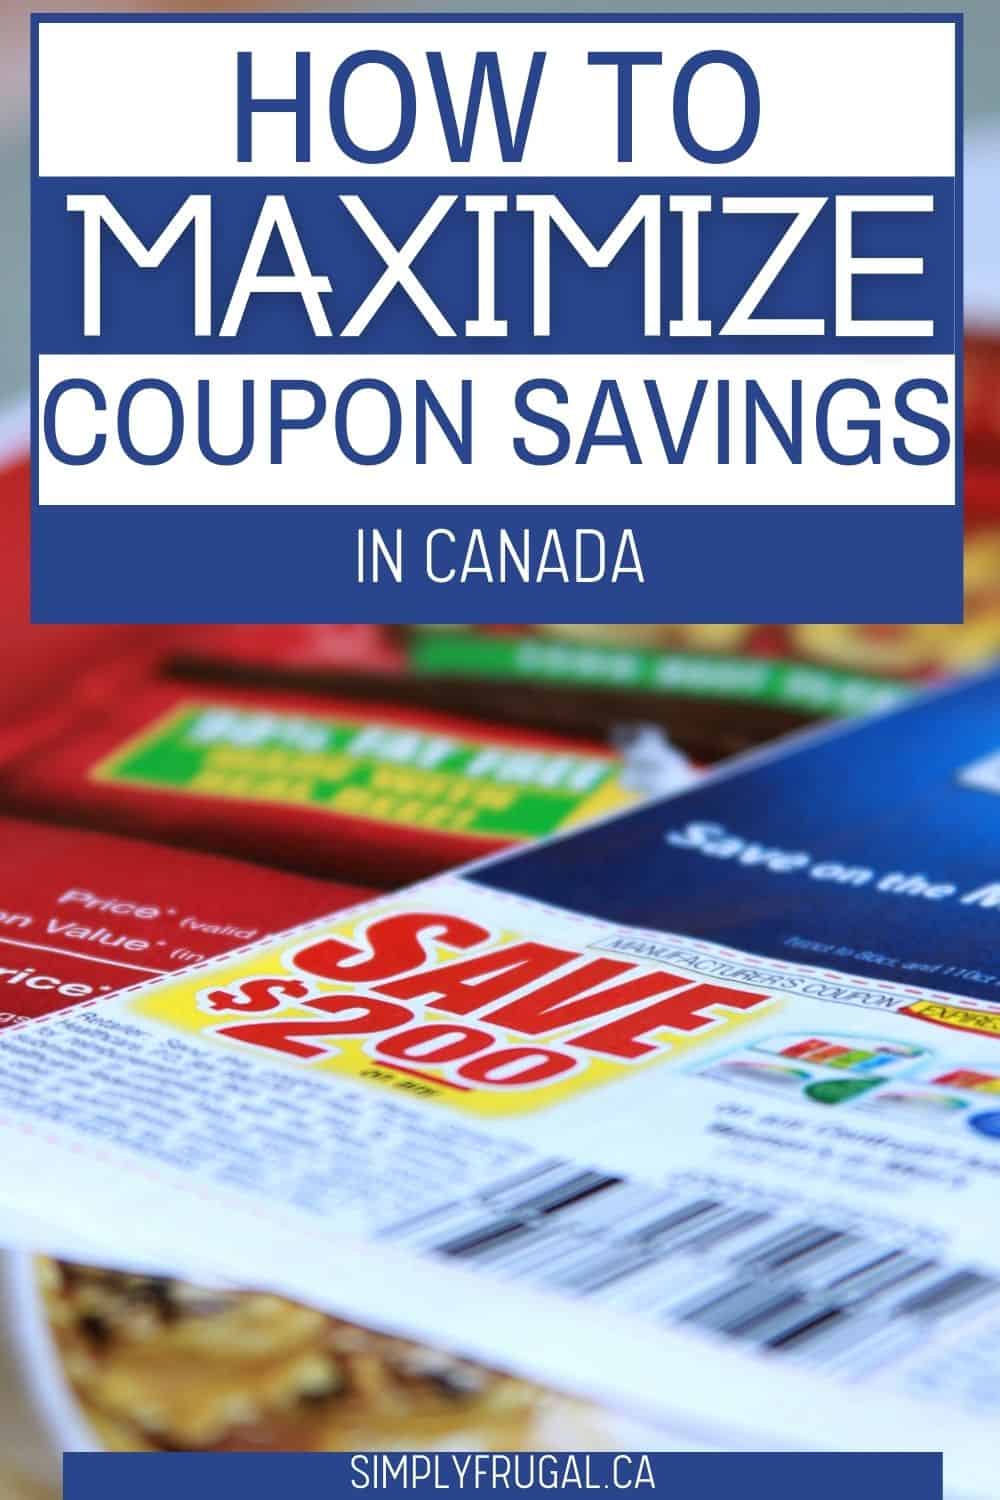 How to Maximize Coupon Savings in Canada